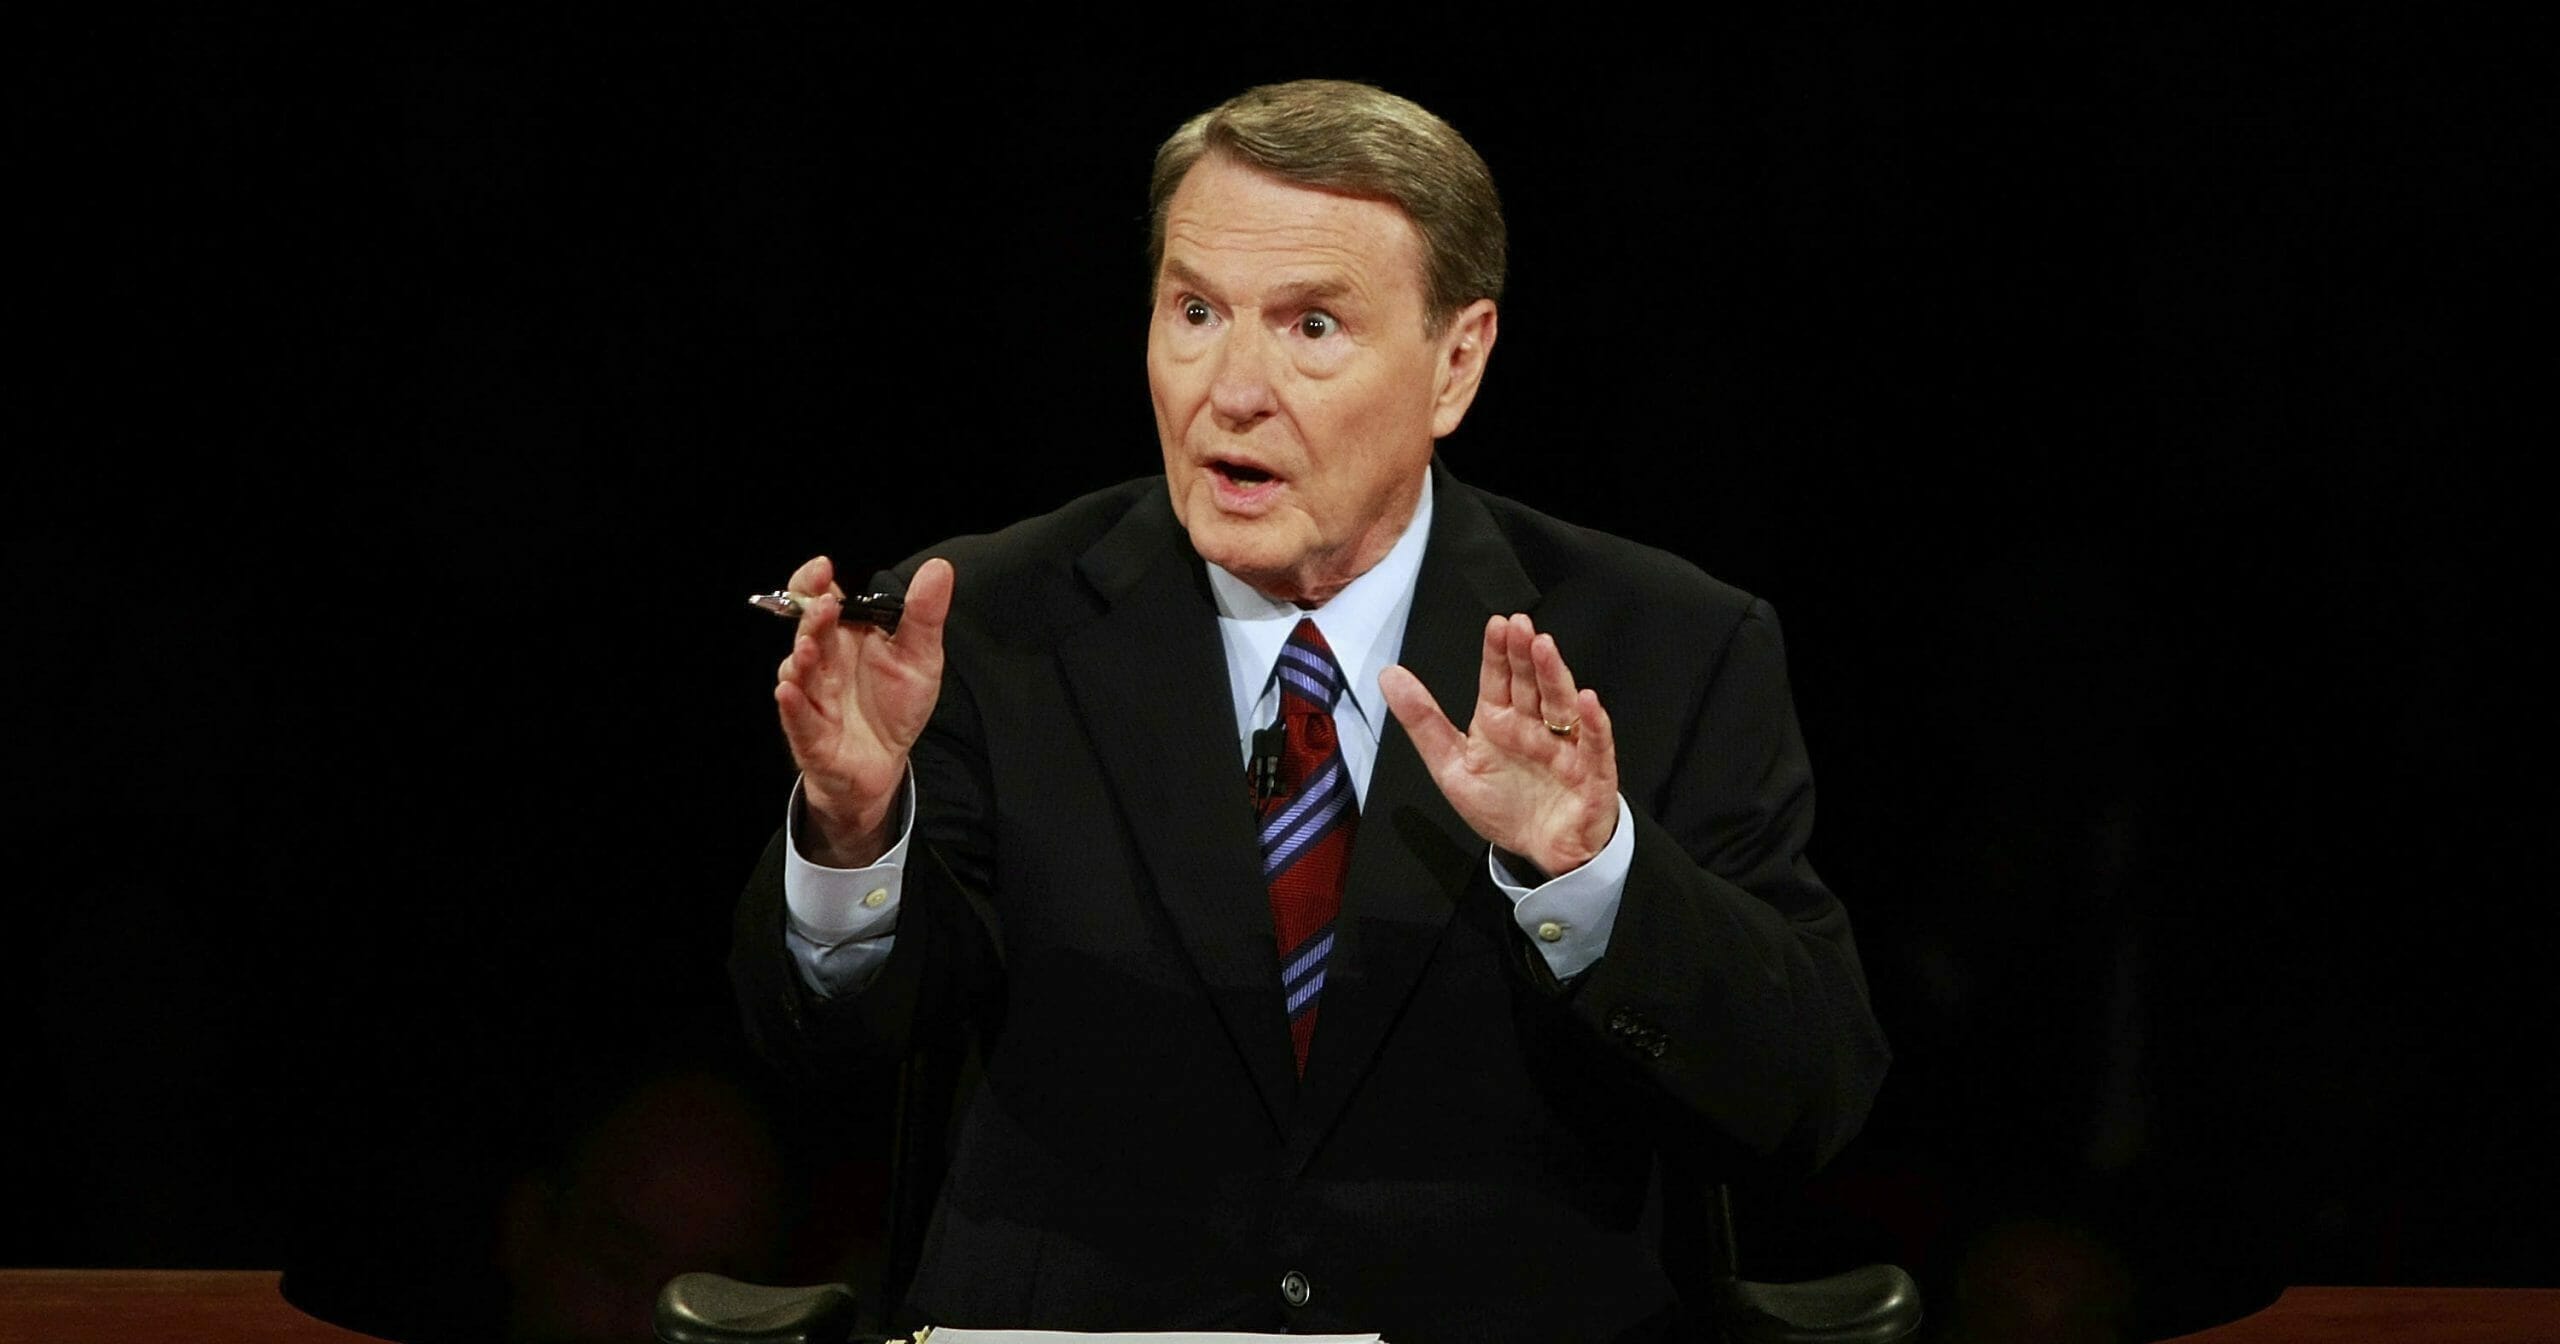 This Sept. 26, 2008, file photo shows debate moderator Jim Lehrer during the first U.S. presidential debate between presidential nominees then-Sen. John McCain (R-Arizona), and then-Sen. Barack Obama (D-Illinois) at the University of Mississippi in Oxford, Mississippi. PBS announced that PBS NewsHour's Jim Lehrer died Jan. 23, 2020, at home. He was 85.